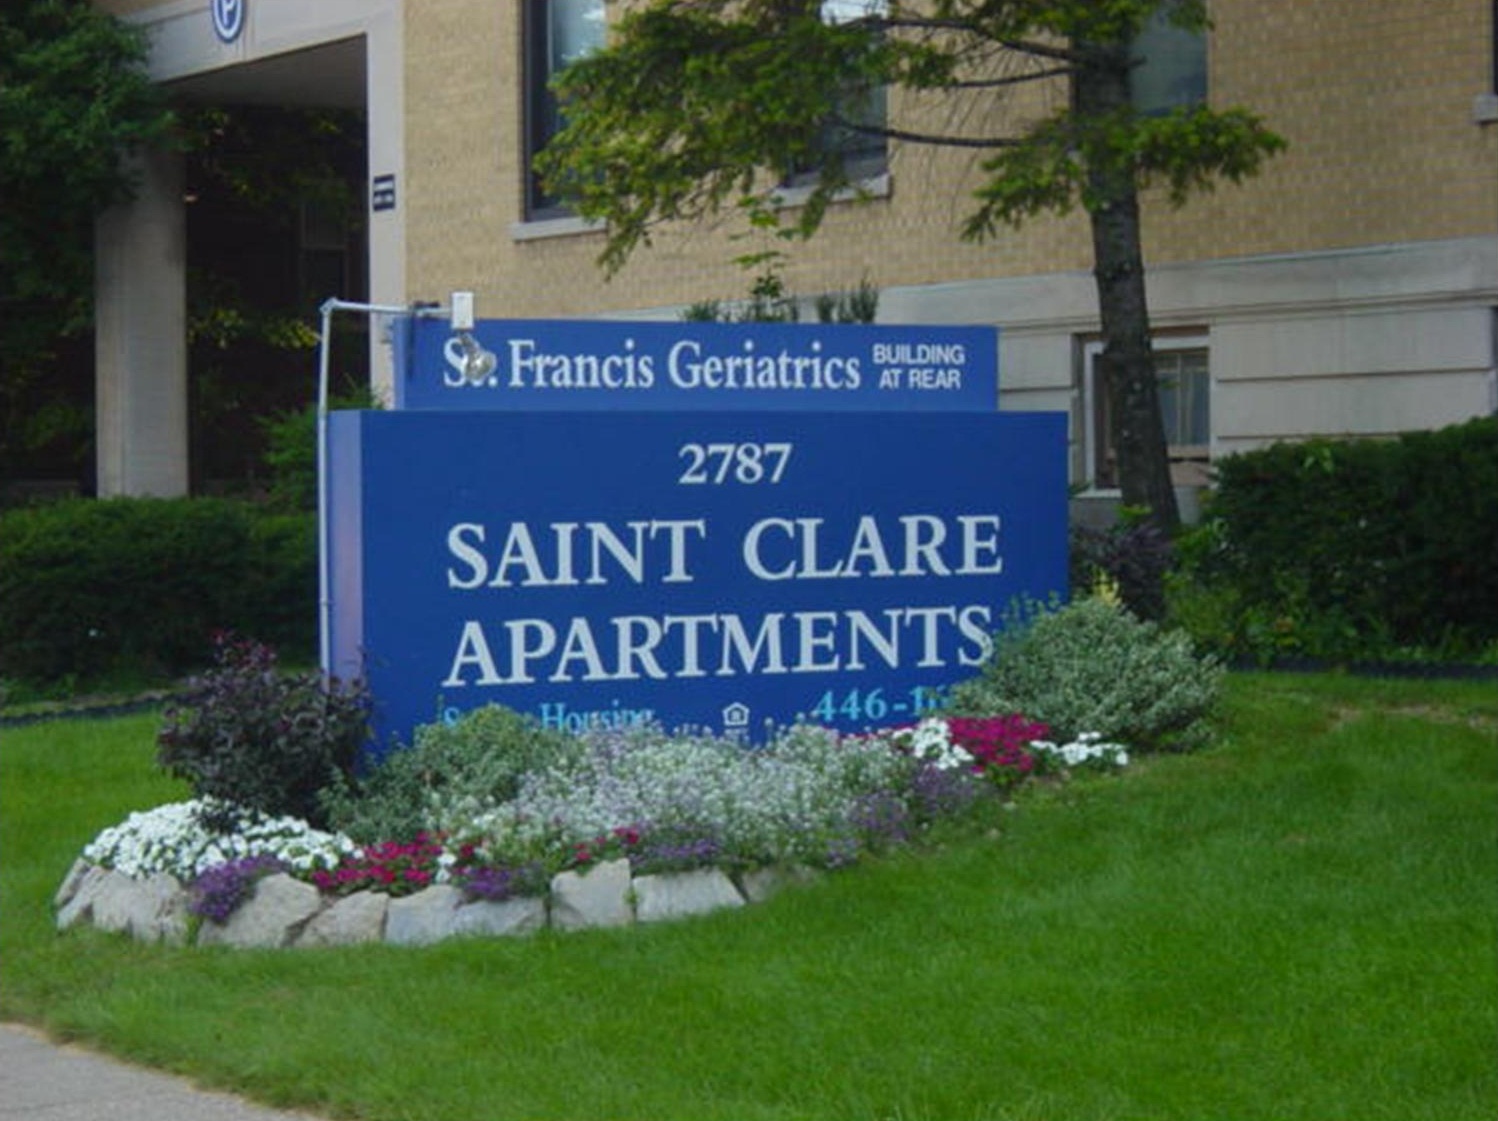 ST. CLARE APARTMENTS